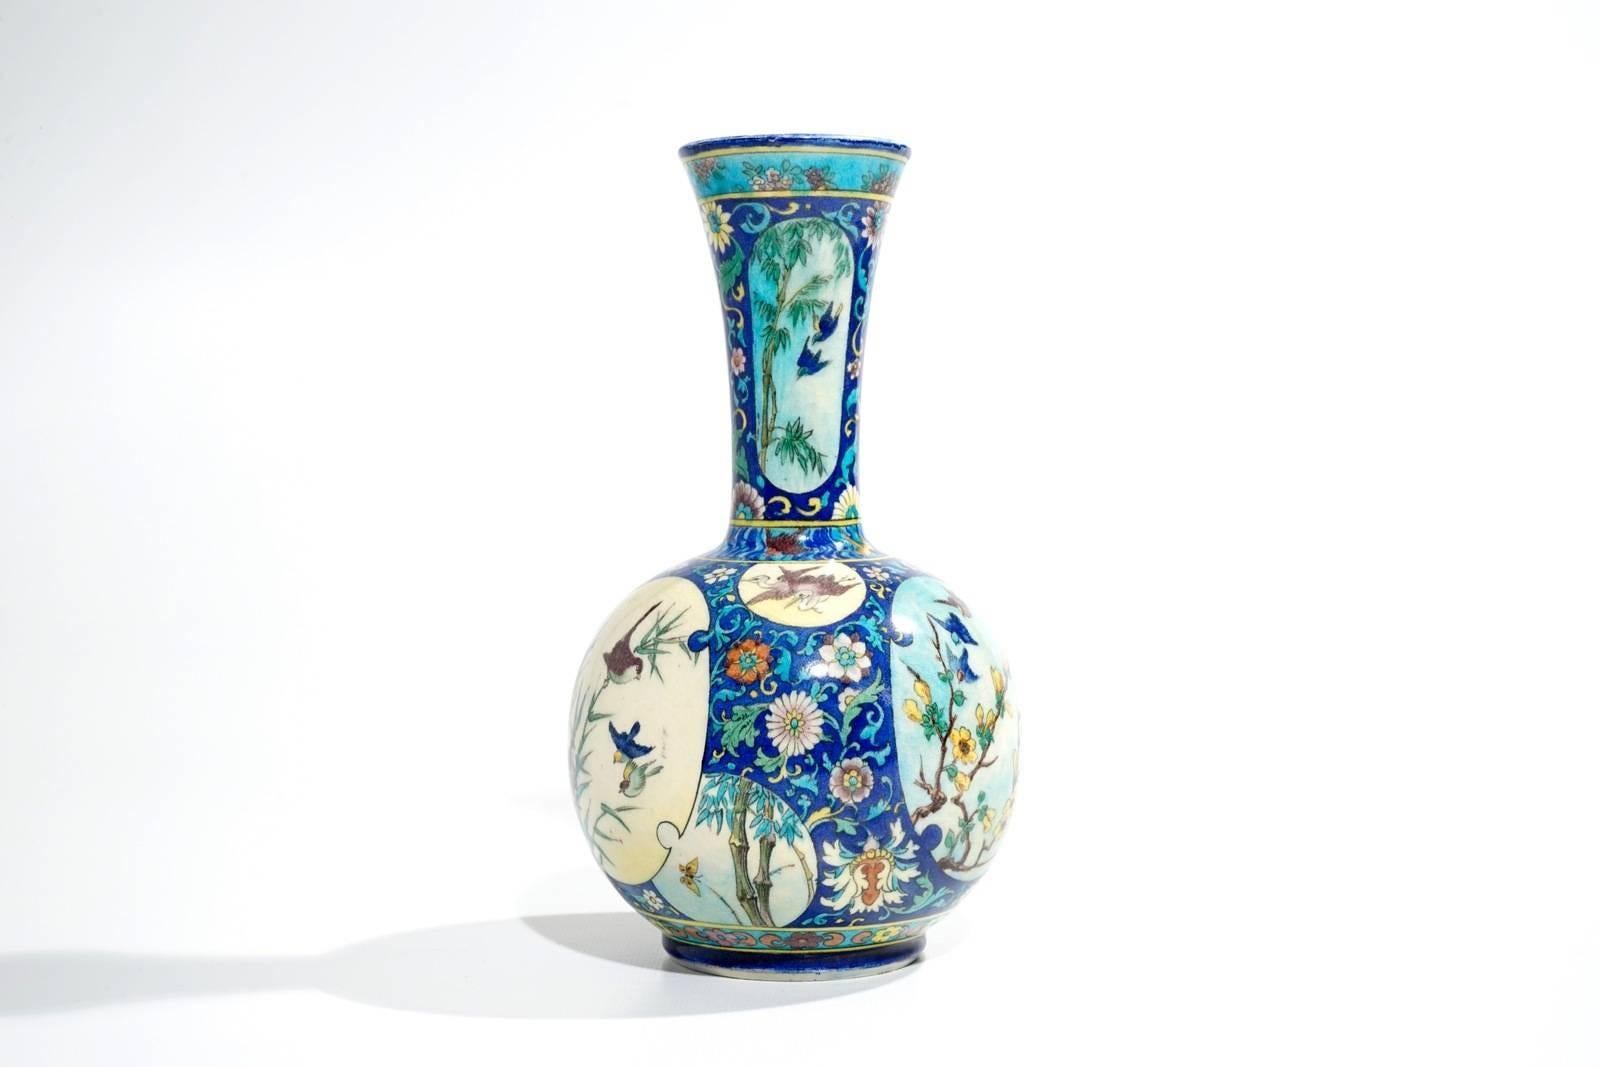 19th Century Theodore Deck, Japonisme Polychromed Faience Baluster Vase